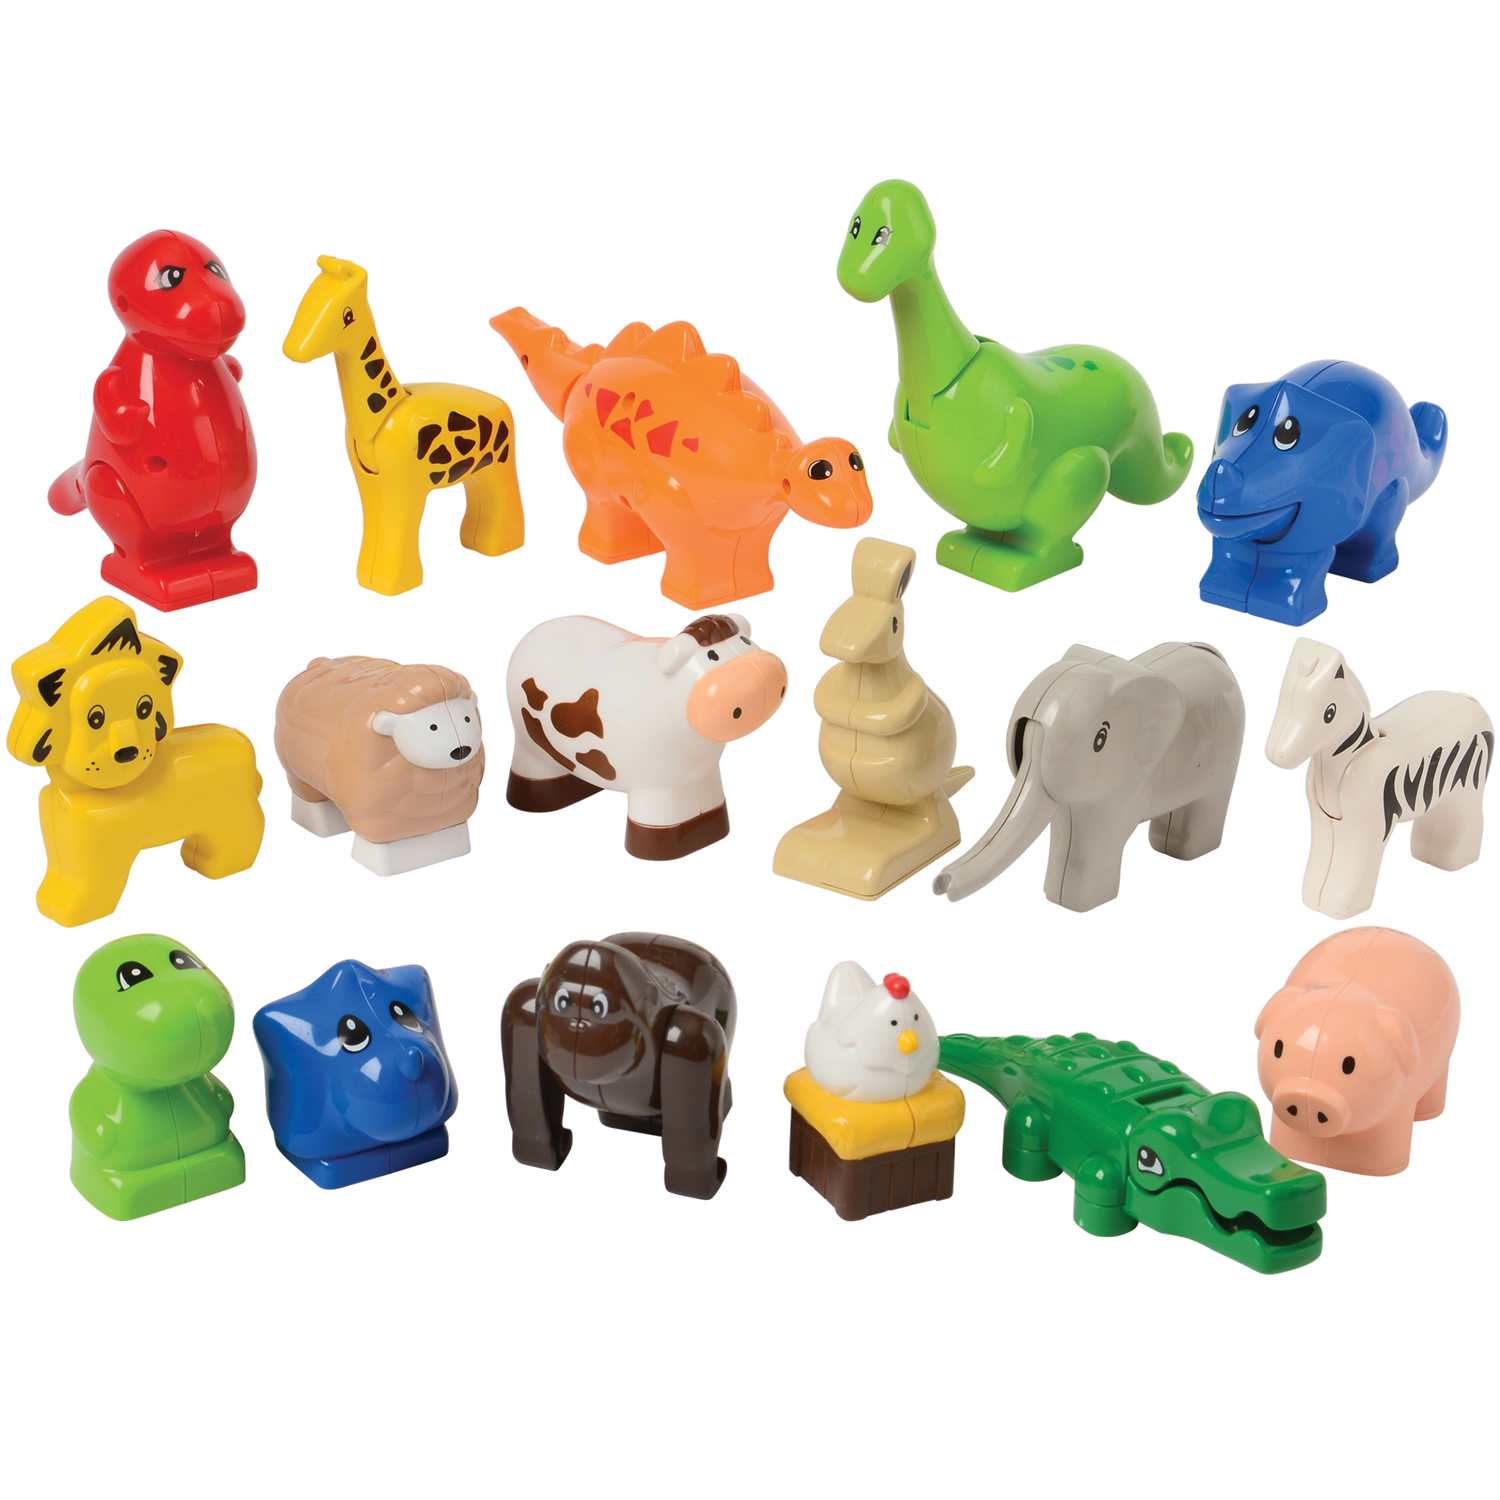 Cre8tive Minds Animals for Preschool Sized Building Blocks, 17 Pieces